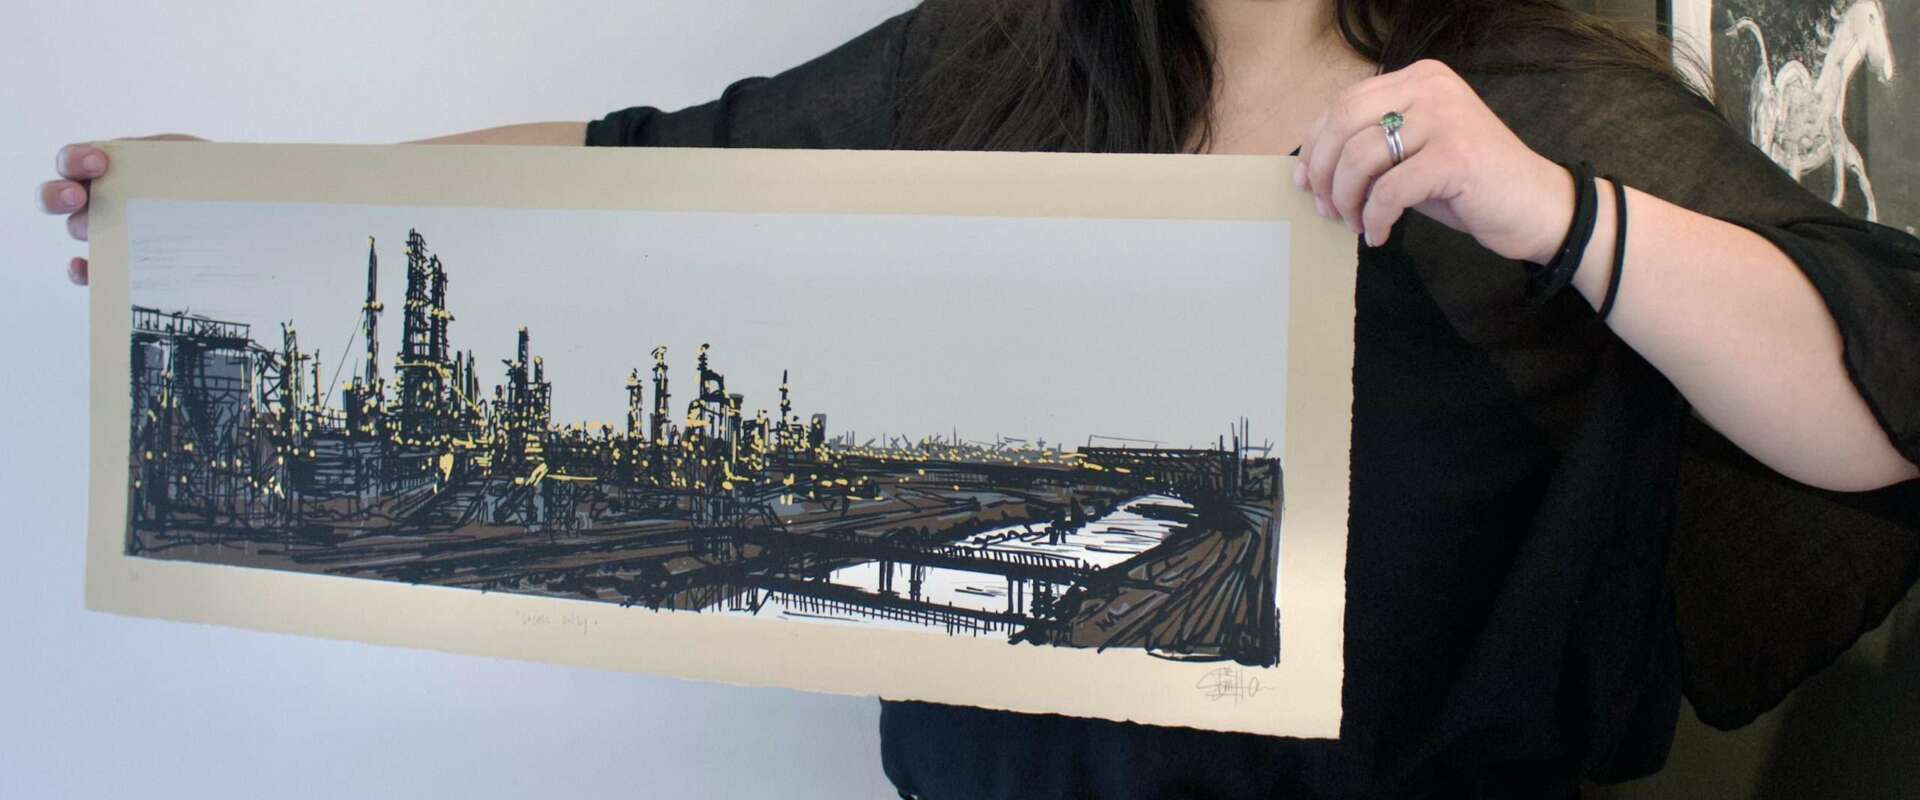 Hands holding a screen print of an oil refinery